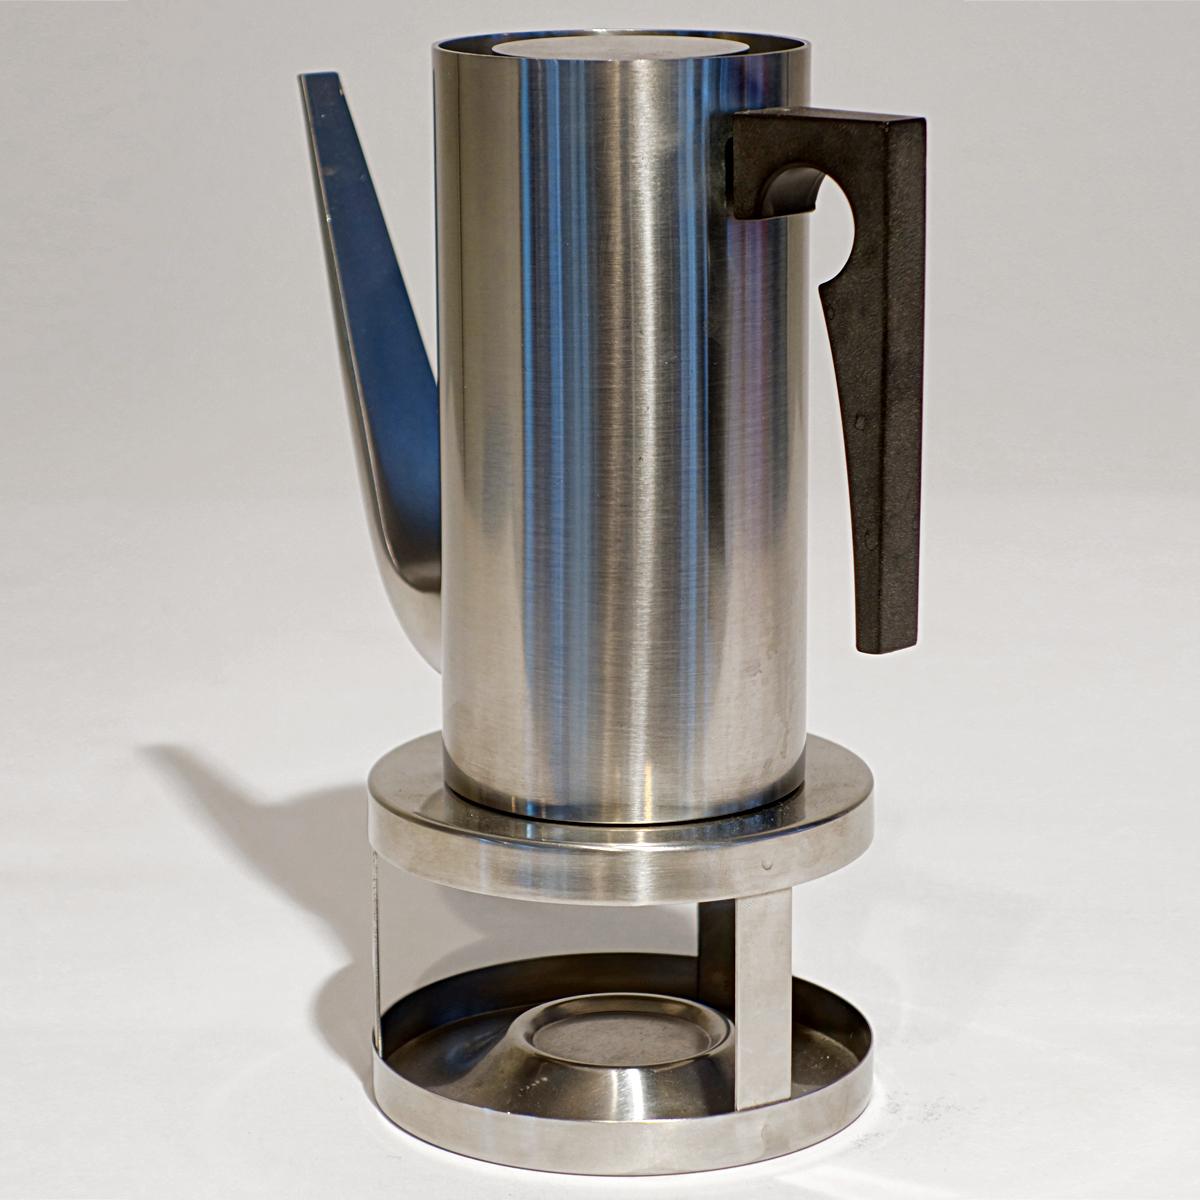 Danish Midcentury Cylinda Coffee Pot and Stove by Arne Jacobsen for Stelton For Sale